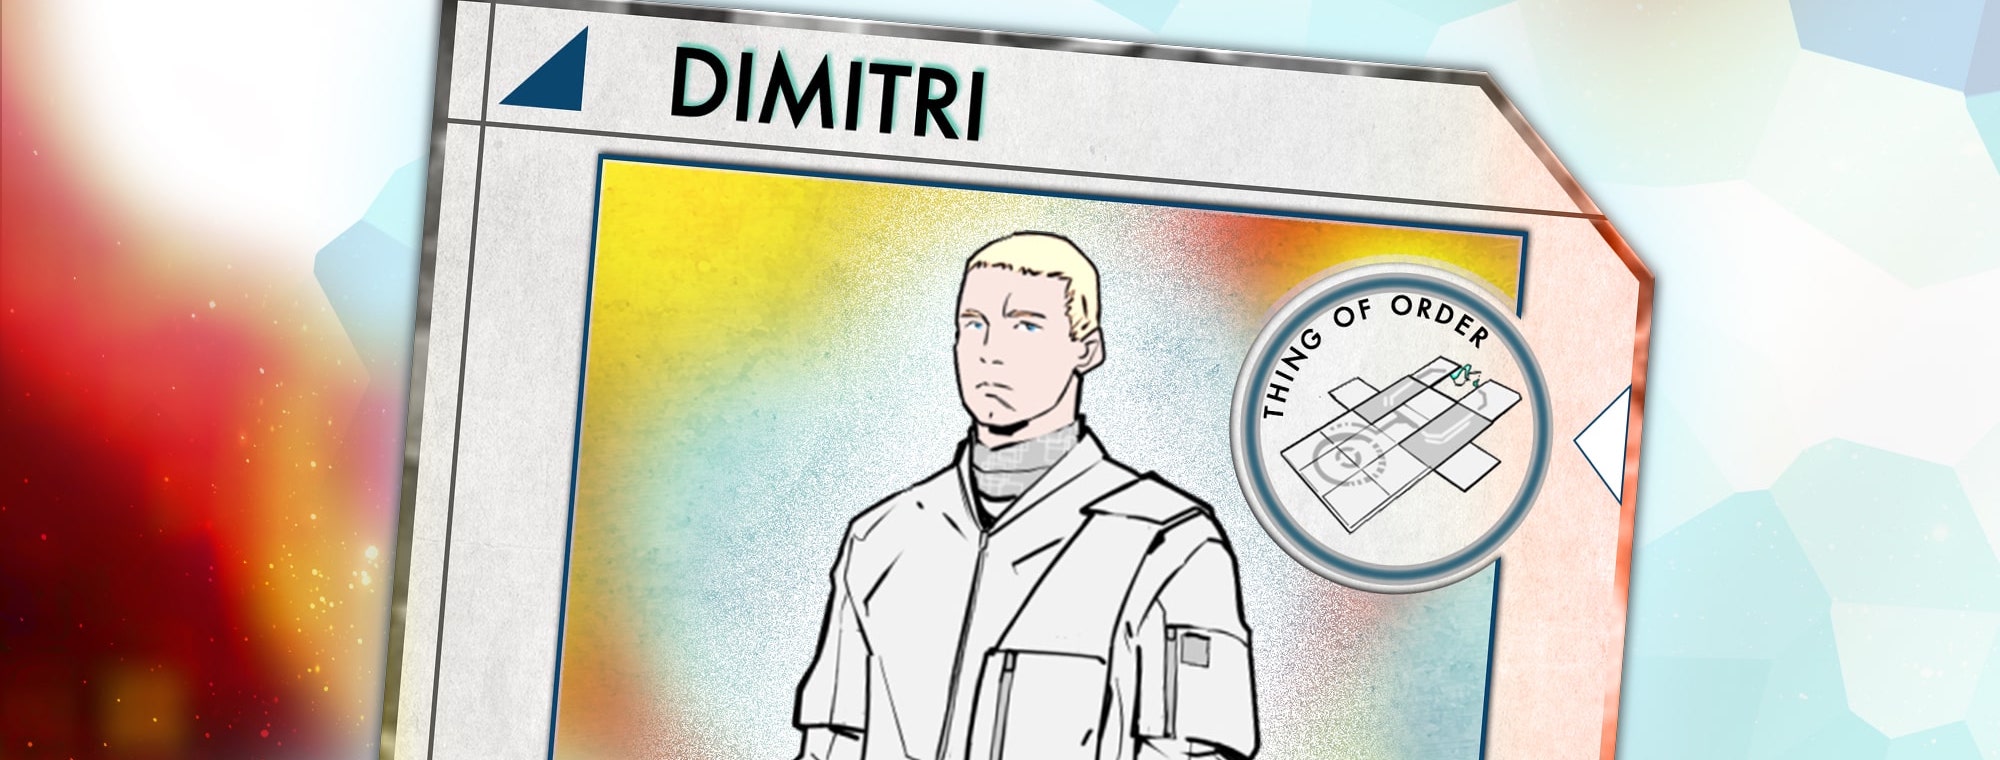 New 'G.O.D.S.' character Dimitri gets character profile and teasers